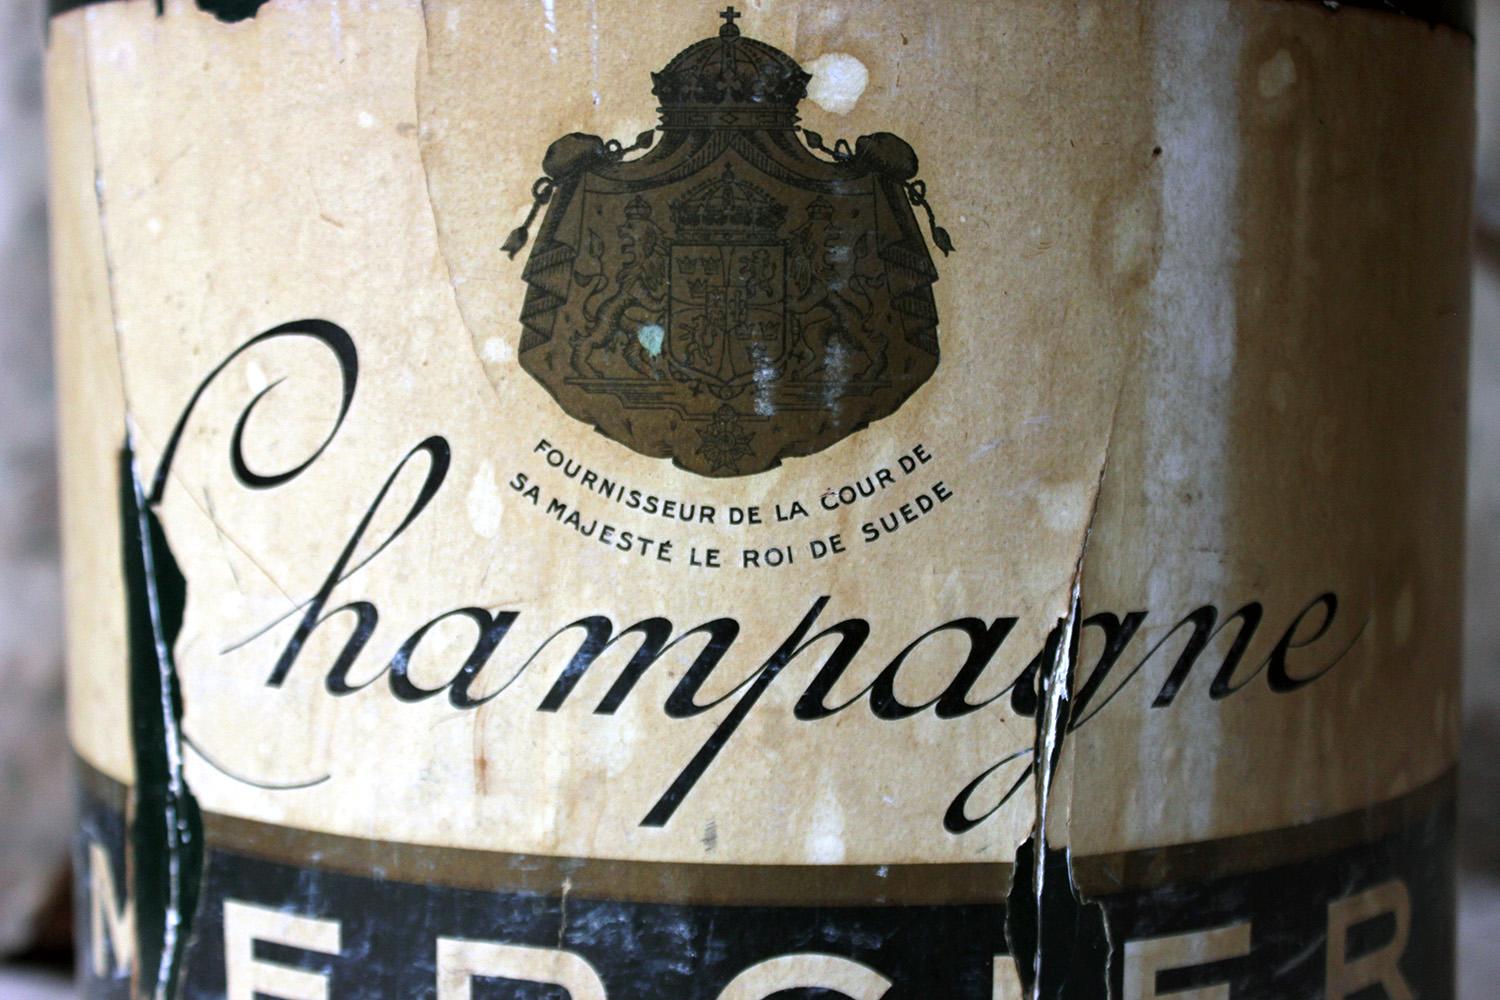 The oversized 1950s era plaster and papier mâché advertising bottle designed to be displayed in a shop window to advertise a bottle of French 1953 vintage A.C. Epernay, Champagne; now nicely worn with age, mid-20th century.

The bottle is in fair